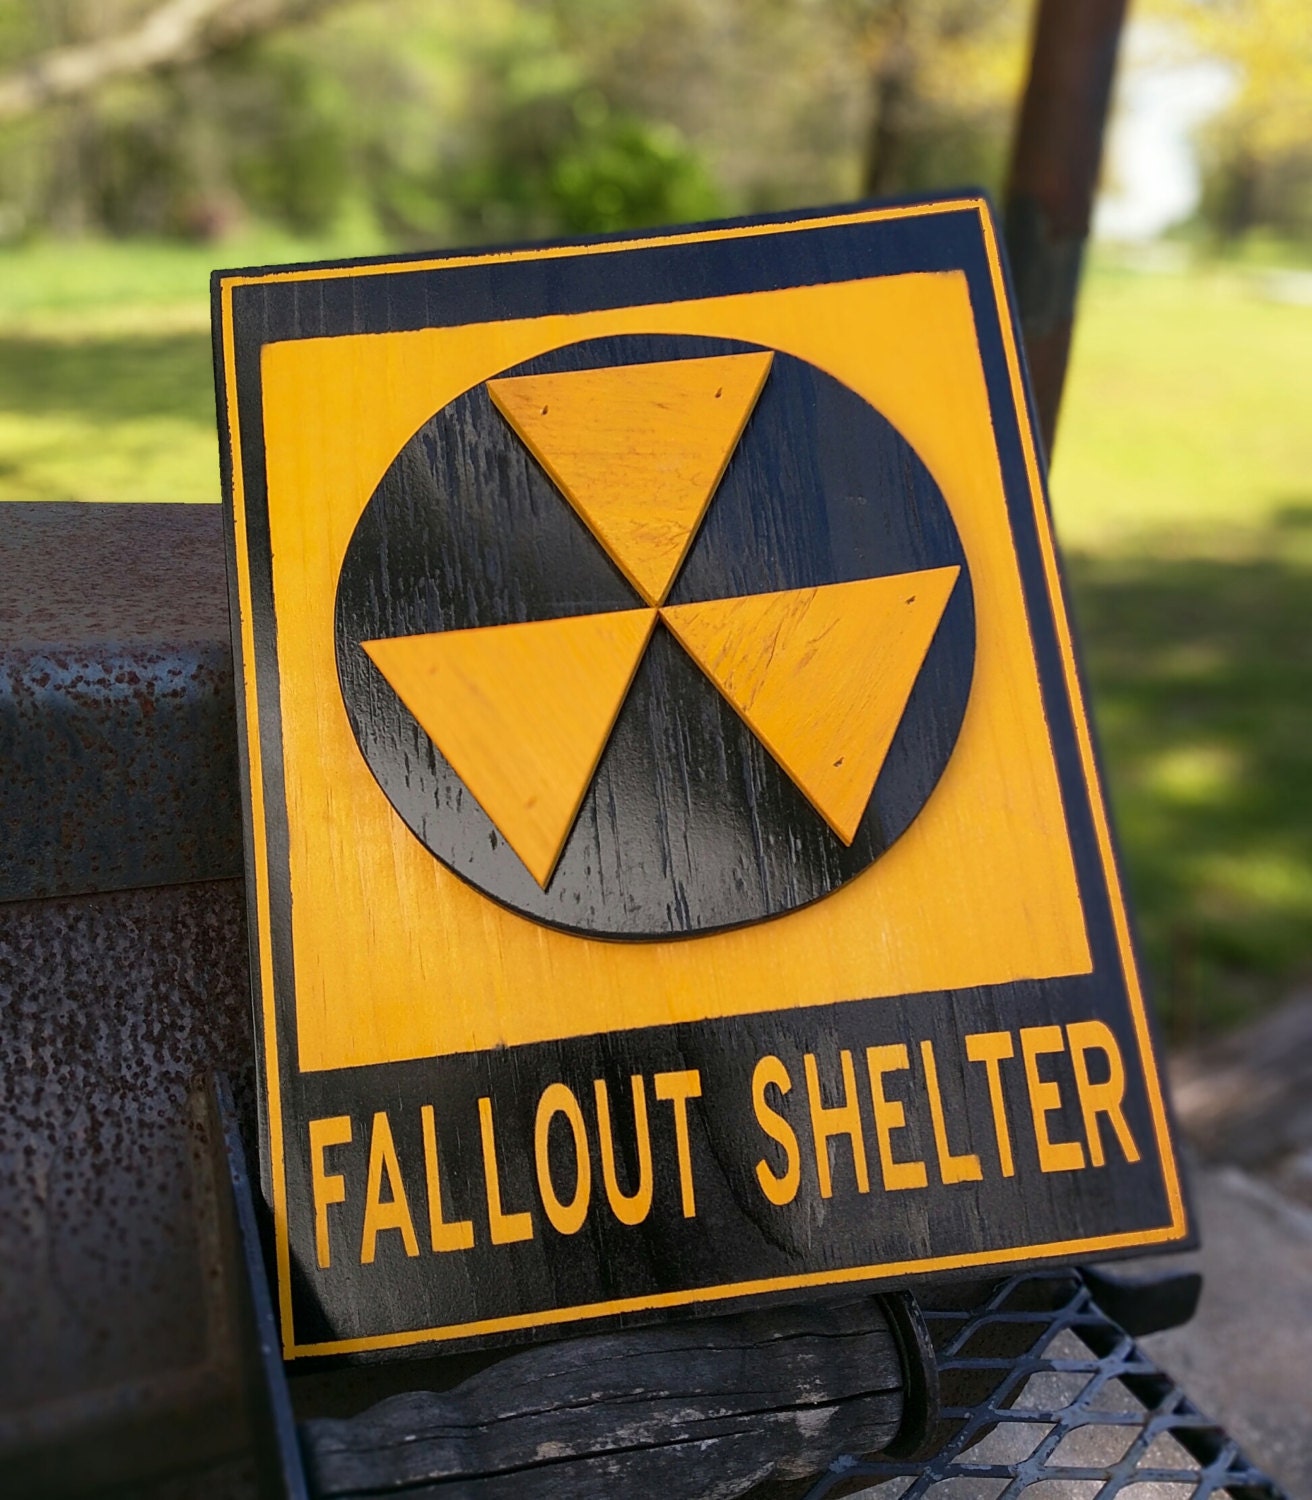 silhouette fallout shelter sign